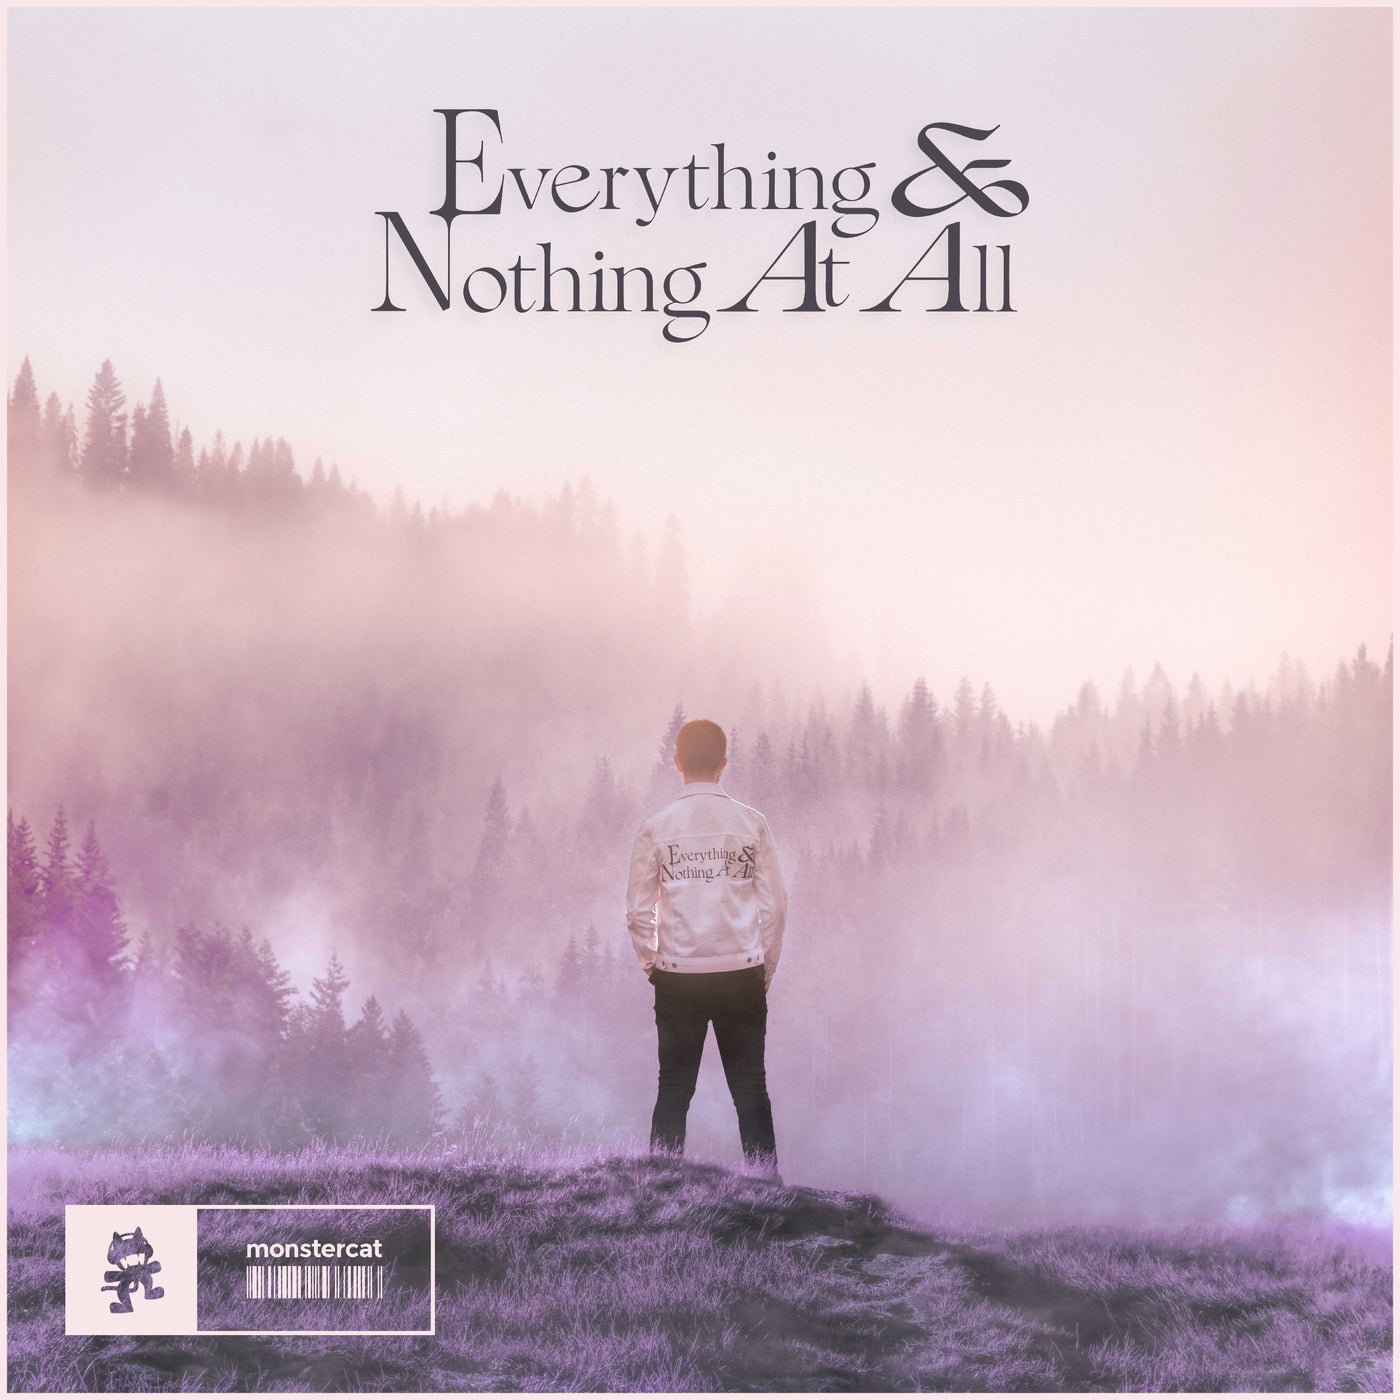 Everything & Nothing At All